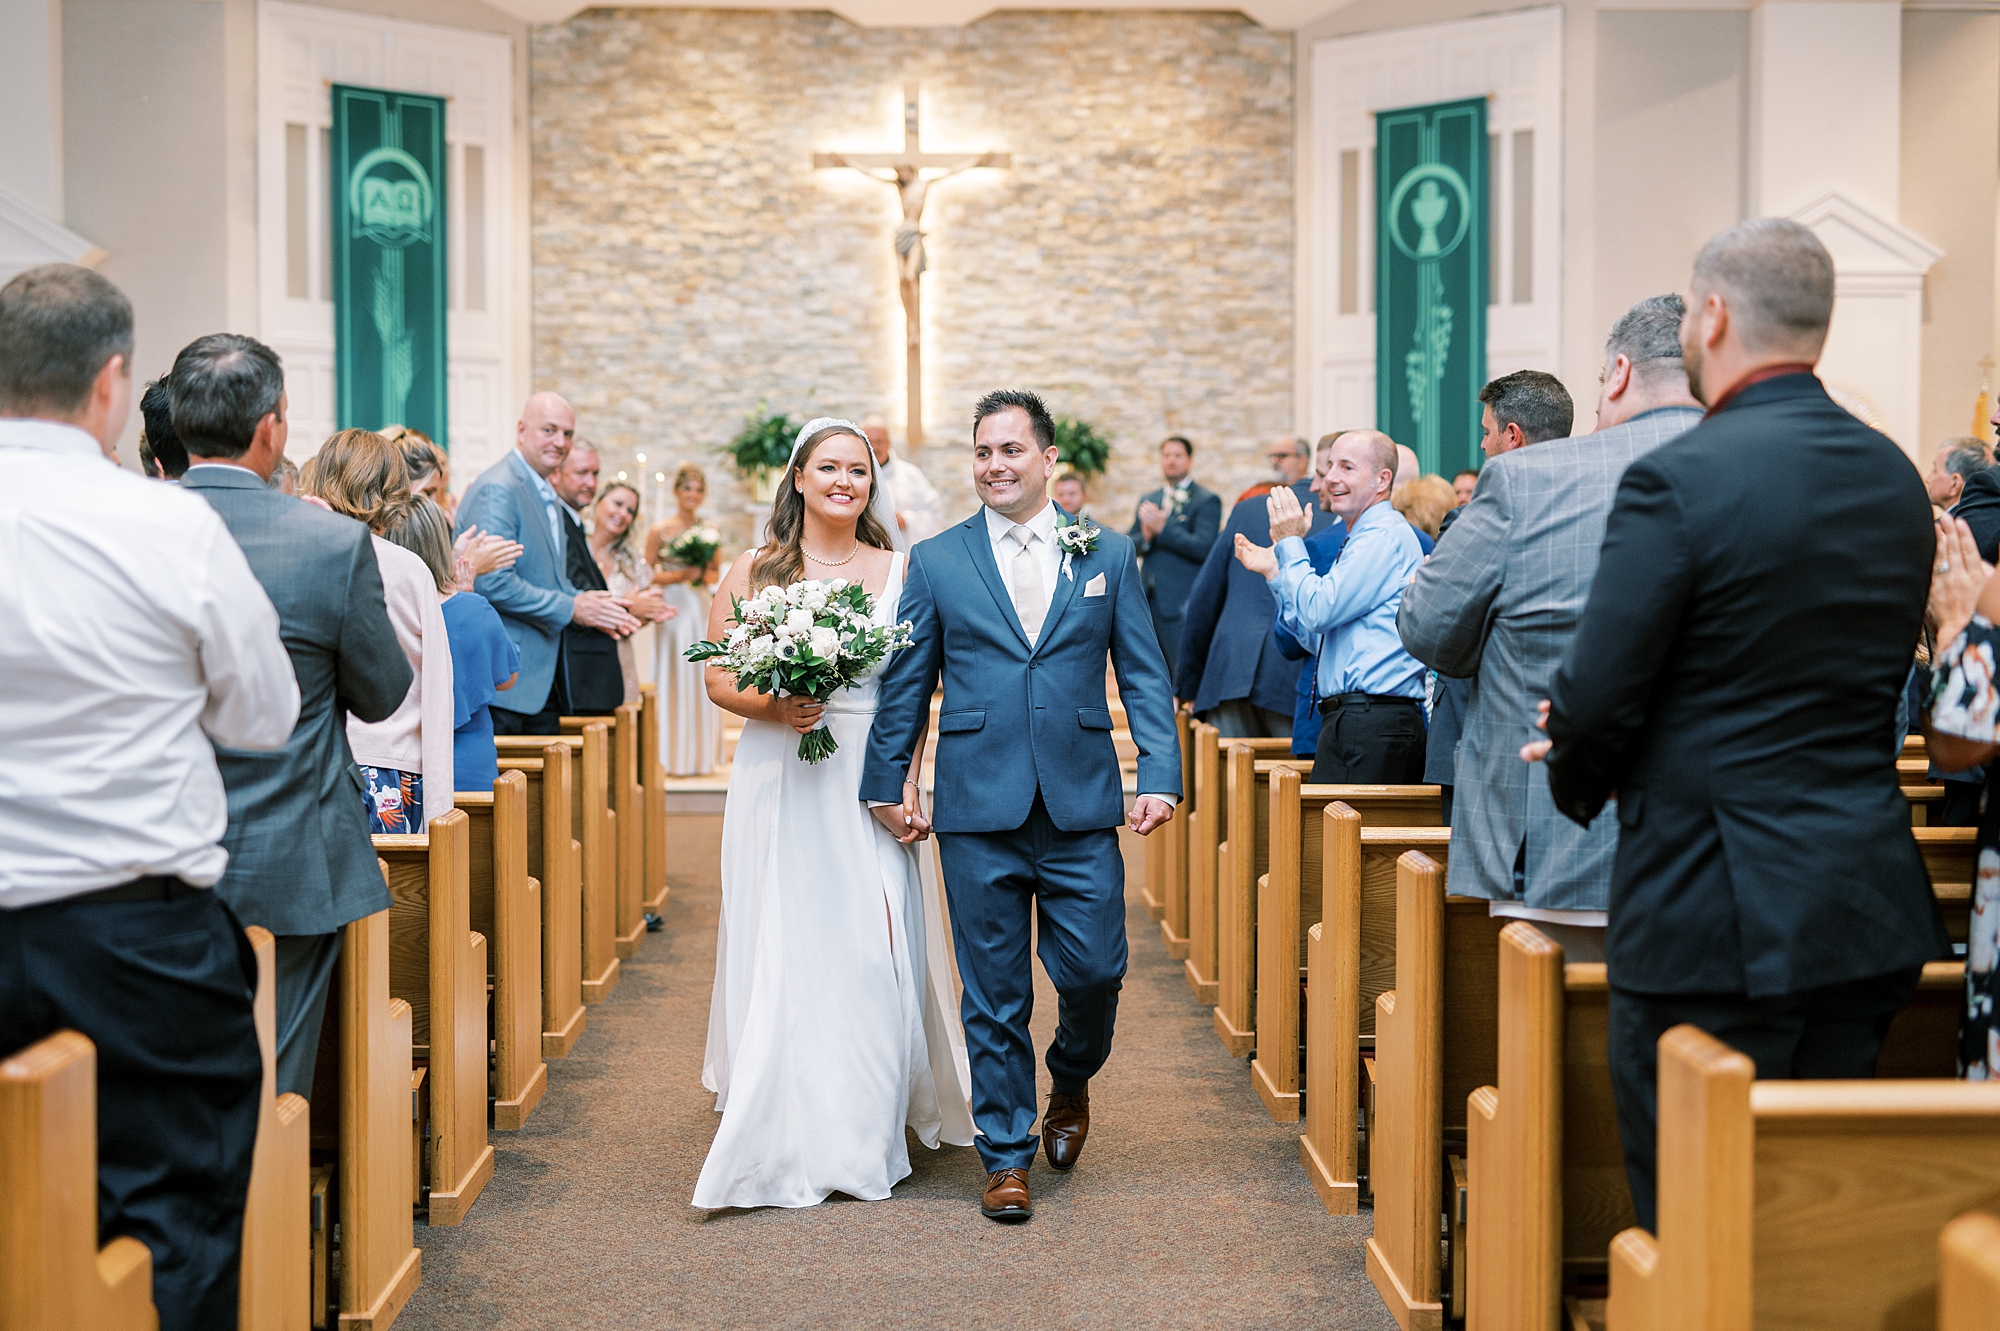 newlyweds exit church after wedding ceremony